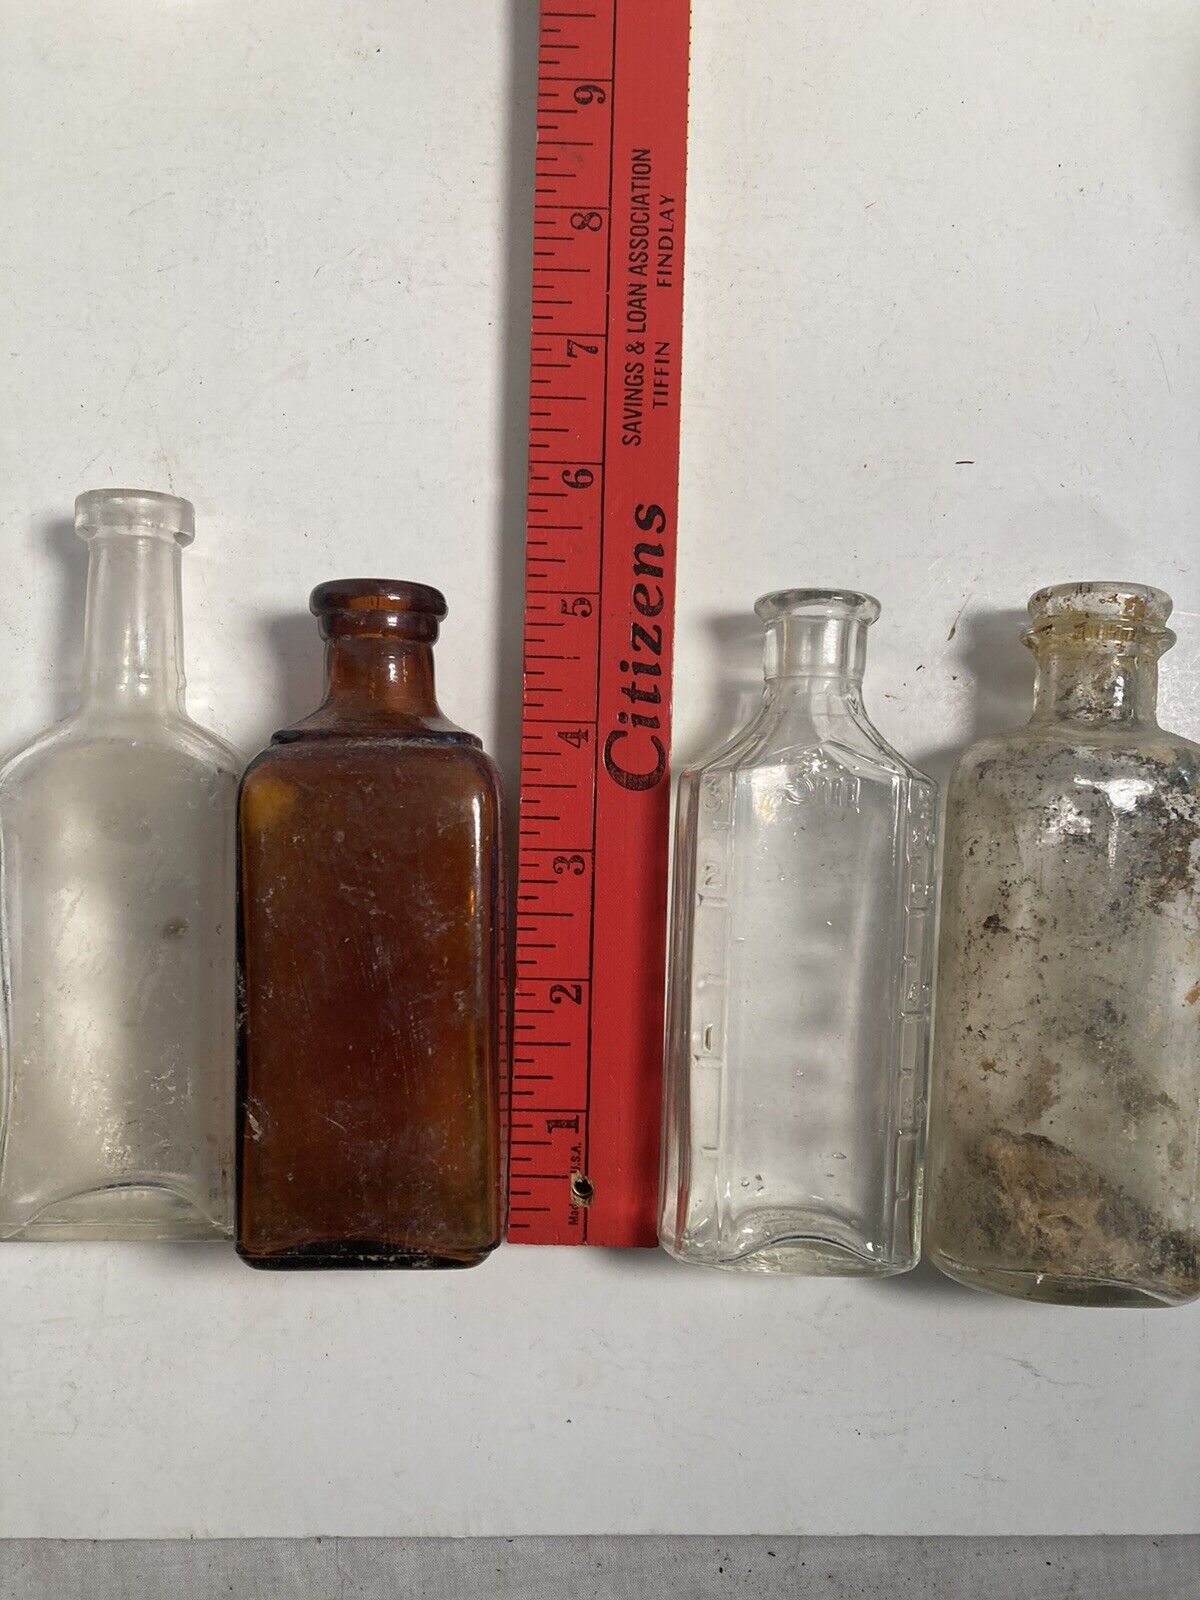 Apothecary, Medicine, Bottles, Industrial, Mercantile Lot of 11, free shipping Без бренда - фотография #3